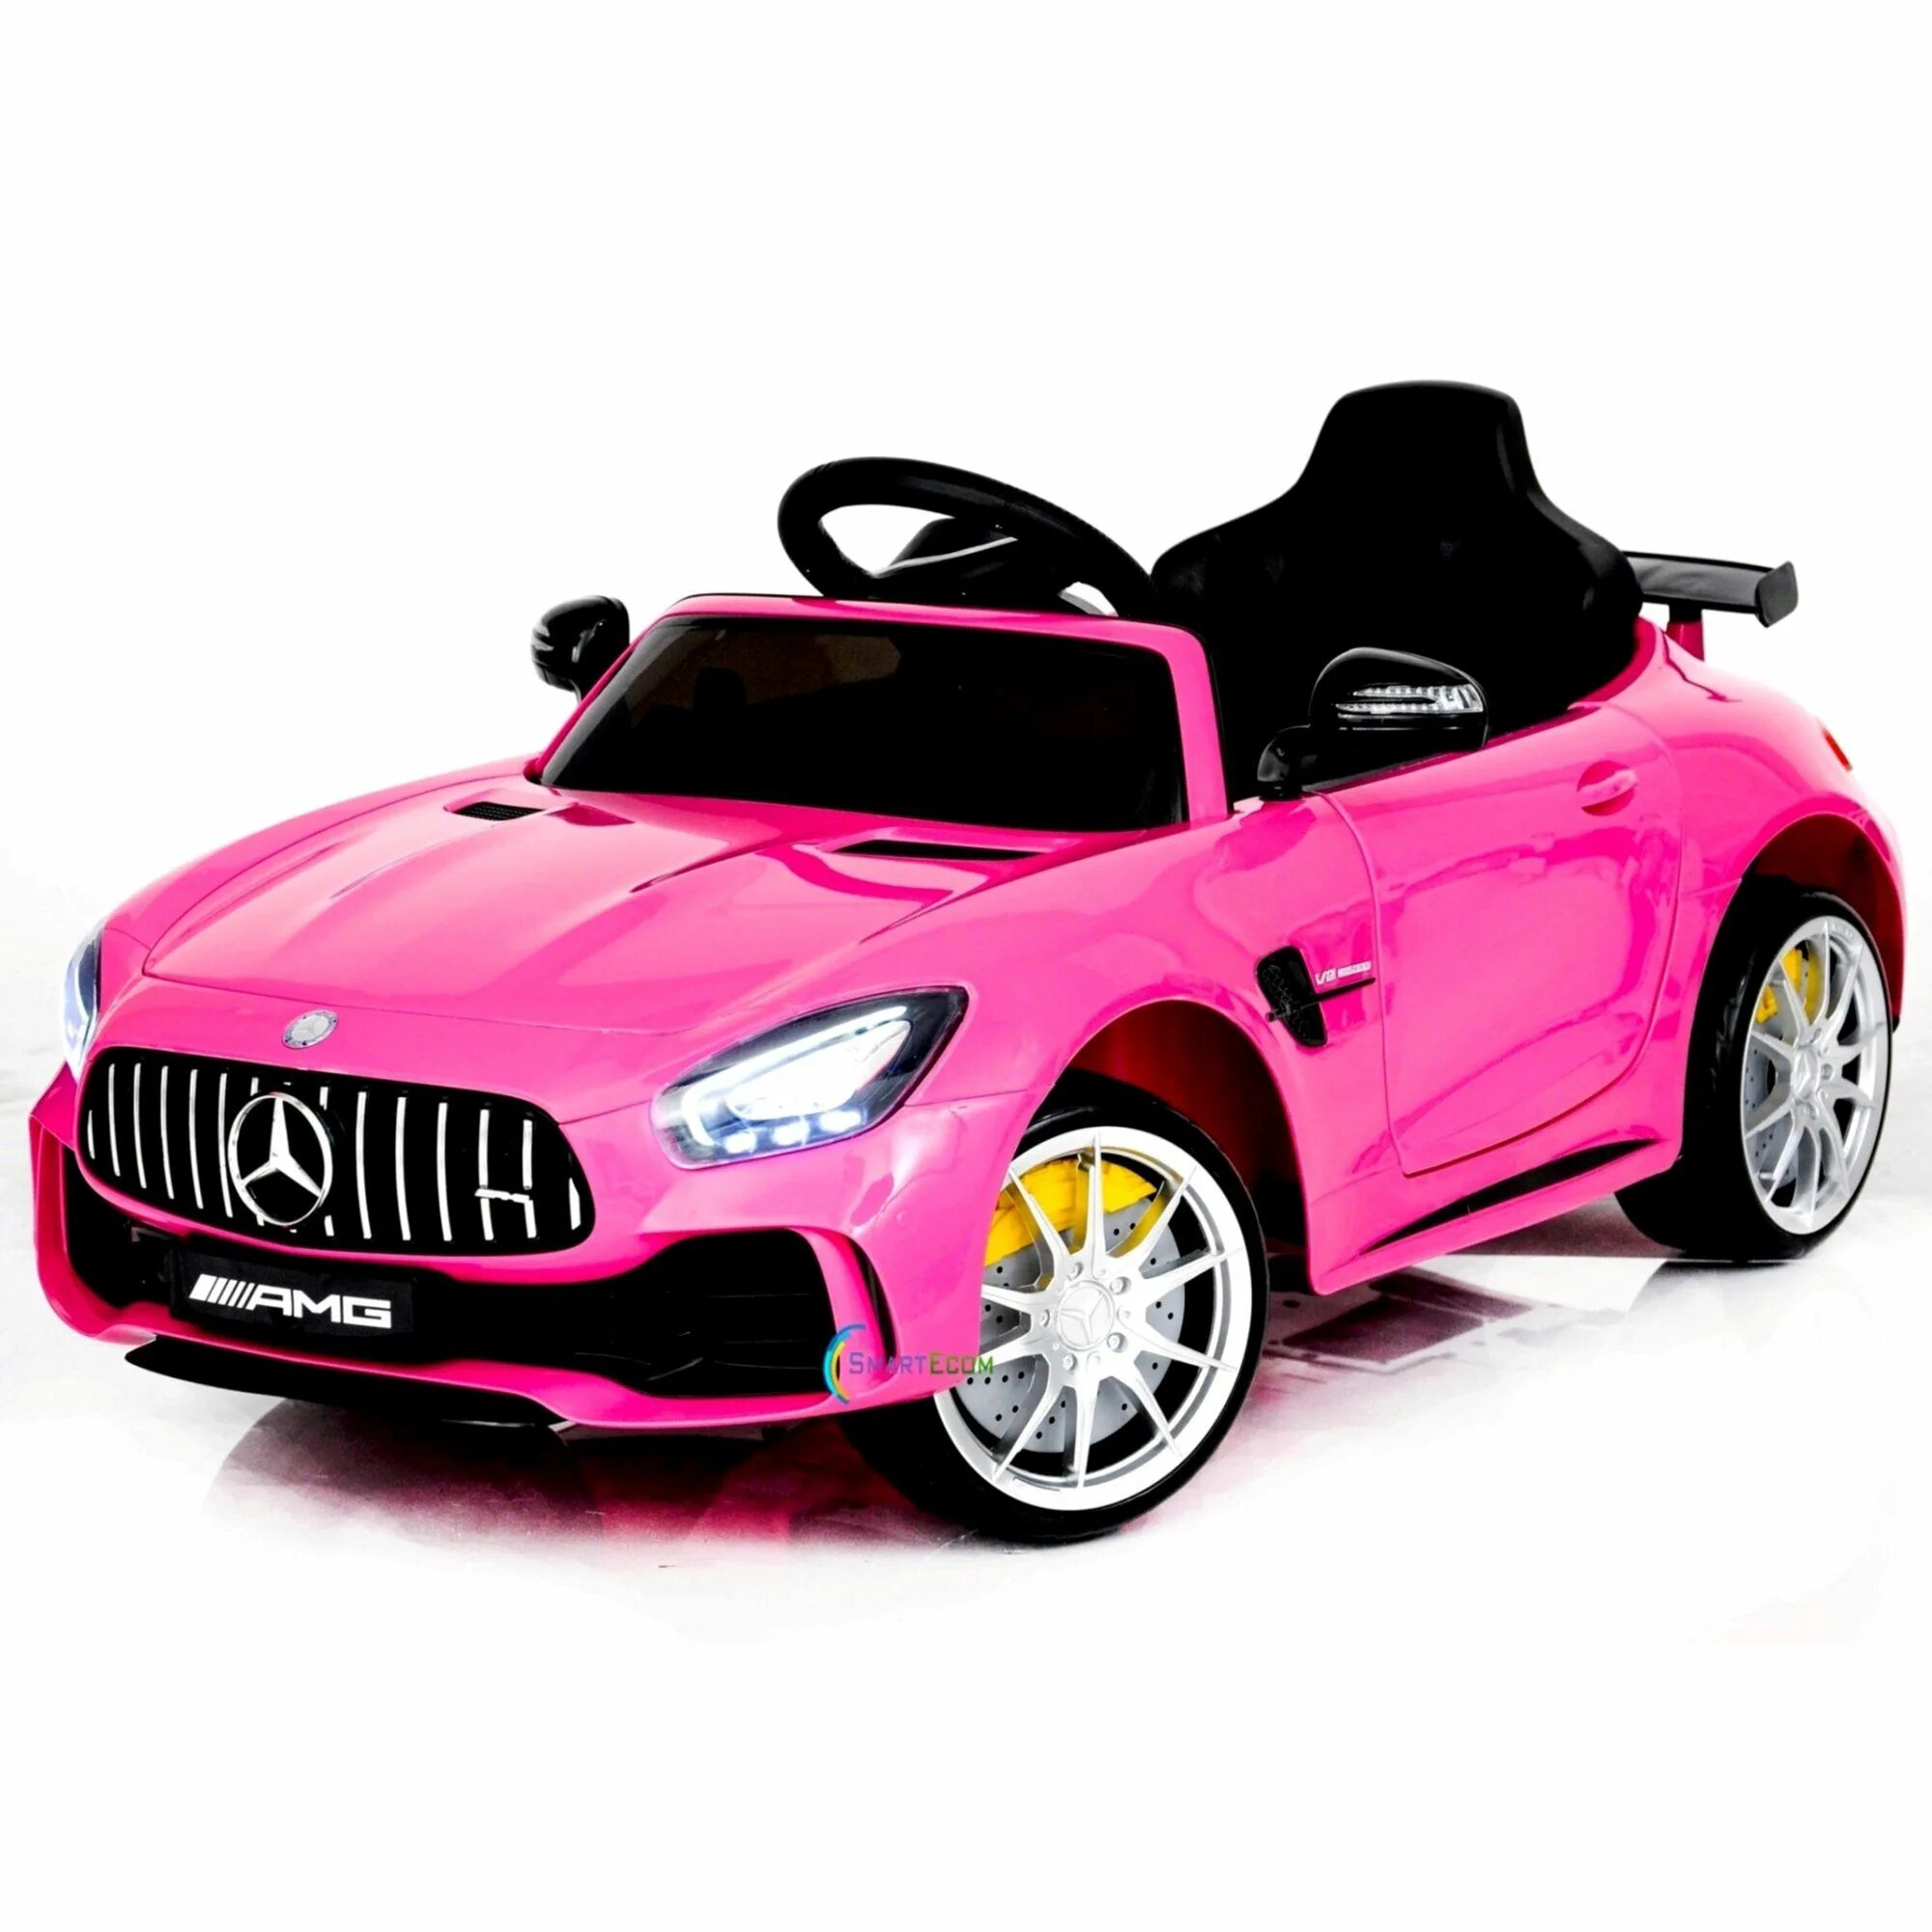 Toys toys машина. Машина Toys игрушка. Power Wheels игрушка. Car Toys for Kids. Electric cars for Kids.